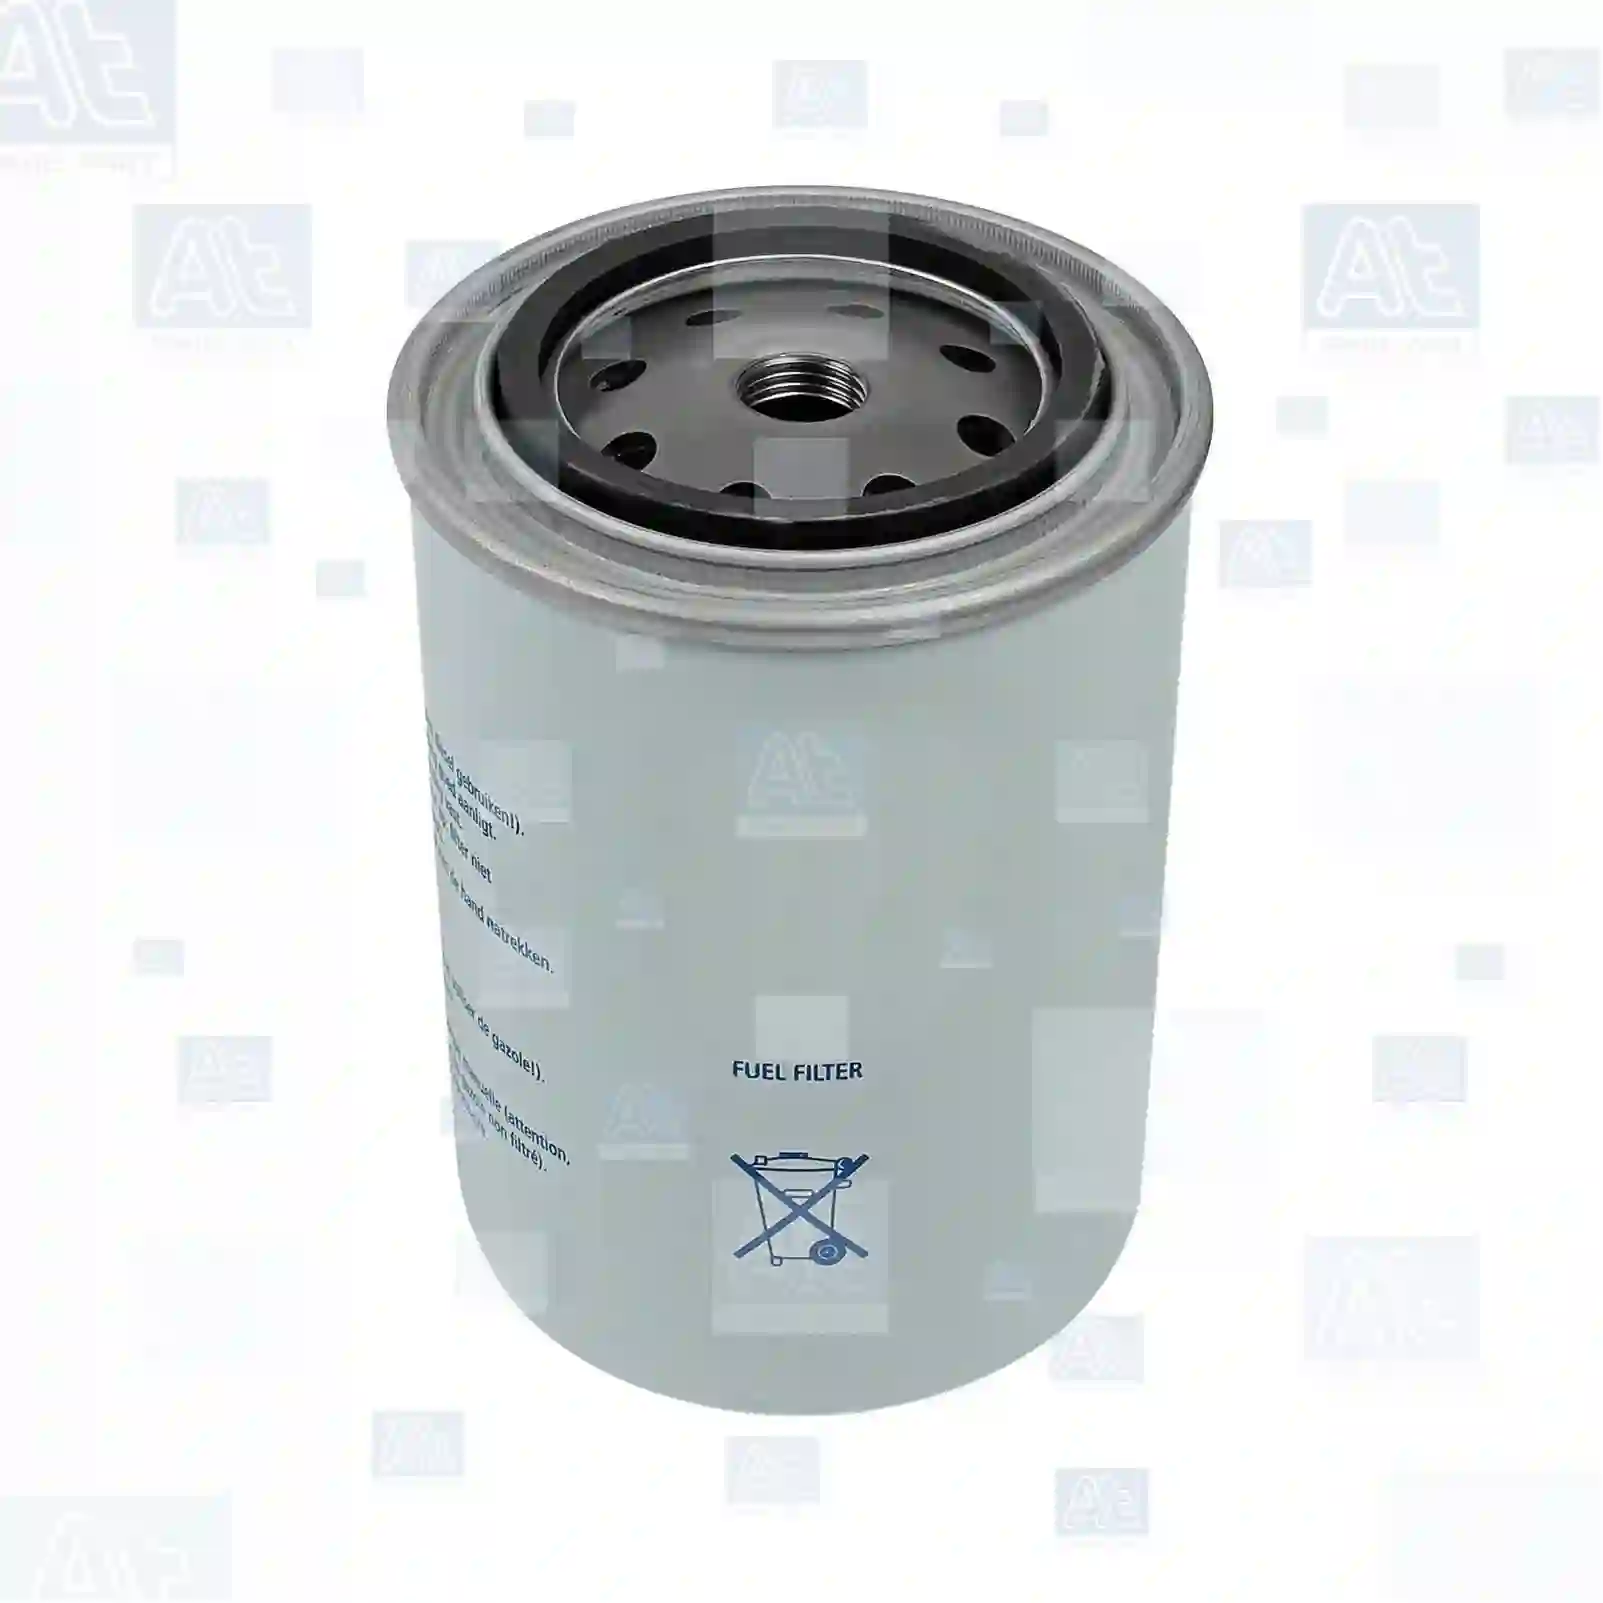 Fuel filter, at no 77723484, oem no: B1050595, 928301, 0001780340, 0247139, 131869, 1318695, 243000, 247139, BRU6932, 00247139, 01161003, 01164520, 01164620, 01174422, 01183359, 01902133, 8121918029300, 0746920, 1470827, 4134475, 00247139, 00363031, 01161003, 01164620, 01174422, Y03732006, 5011267, 5011490, 01164620, 01902133, 503139140, 40001351, 01161003, 01164620, 01174422, 8121918029300, 550228577, 5601514, 0000928301, 605411880004, 60541188004, 1050595, B1050595, 5010359706, 6005019574, 928324, SN324, 0170149000, 170149000, 21777451, 11711074, ZG10130-0008 At Spare Part | Engine, Accelerator Pedal, Camshaft, Connecting Rod, Crankcase, Crankshaft, Cylinder Head, Engine Suspension Mountings, Exhaust Manifold, Exhaust Gas Recirculation, Filter Kits, Flywheel Housing, General Overhaul Kits, Engine, Intake Manifold, Oil Cleaner, Oil Cooler, Oil Filter, Oil Pump, Oil Sump, Piston & Liner, Sensor & Switch, Timing Case, Turbocharger, Cooling System, Belt Tensioner, Coolant Filter, Coolant Pipe, Corrosion Prevention Agent, Drive, Expansion Tank, Fan, Intercooler, Monitors & Gauges, Radiator, Thermostat, V-Belt / Timing belt, Water Pump, Fuel System, Electronical Injector Unit, Feed Pump, Fuel Filter, cpl., Fuel Gauge Sender,  Fuel Line, Fuel Pump, Fuel Tank, Injection Line Kit, Injection Pump, Exhaust System, Clutch & Pedal, Gearbox, Propeller Shaft, Axles, Brake System, Hubs & Wheels, Suspension, Leaf Spring, Universal Parts / Accessories, Steering, Electrical System, Cabin Fuel filter, at no 77723484, oem no: B1050595, 928301, 0001780340, 0247139, 131869, 1318695, 243000, 247139, BRU6932, 00247139, 01161003, 01164520, 01164620, 01174422, 01183359, 01902133, 8121918029300, 0746920, 1470827, 4134475, 00247139, 00363031, 01161003, 01164620, 01174422, Y03732006, 5011267, 5011490, 01164620, 01902133, 503139140, 40001351, 01161003, 01164620, 01174422, 8121918029300, 550228577, 5601514, 0000928301, 605411880004, 60541188004, 1050595, B1050595, 5010359706, 6005019574, 928324, SN324, 0170149000, 170149000, 21777451, 11711074, ZG10130-0008 At Spare Part | Engine, Accelerator Pedal, Camshaft, Connecting Rod, Crankcase, Crankshaft, Cylinder Head, Engine Suspension Mountings, Exhaust Manifold, Exhaust Gas Recirculation, Filter Kits, Flywheel Housing, General Overhaul Kits, Engine, Intake Manifold, Oil Cleaner, Oil Cooler, Oil Filter, Oil Pump, Oil Sump, Piston & Liner, Sensor & Switch, Timing Case, Turbocharger, Cooling System, Belt Tensioner, Coolant Filter, Coolant Pipe, Corrosion Prevention Agent, Drive, Expansion Tank, Fan, Intercooler, Monitors & Gauges, Radiator, Thermostat, V-Belt / Timing belt, Water Pump, Fuel System, Electronical Injector Unit, Feed Pump, Fuel Filter, cpl., Fuel Gauge Sender,  Fuel Line, Fuel Pump, Fuel Tank, Injection Line Kit, Injection Pump, Exhaust System, Clutch & Pedal, Gearbox, Propeller Shaft, Axles, Brake System, Hubs & Wheels, Suspension, Leaf Spring, Universal Parts / Accessories, Steering, Electrical System, Cabin